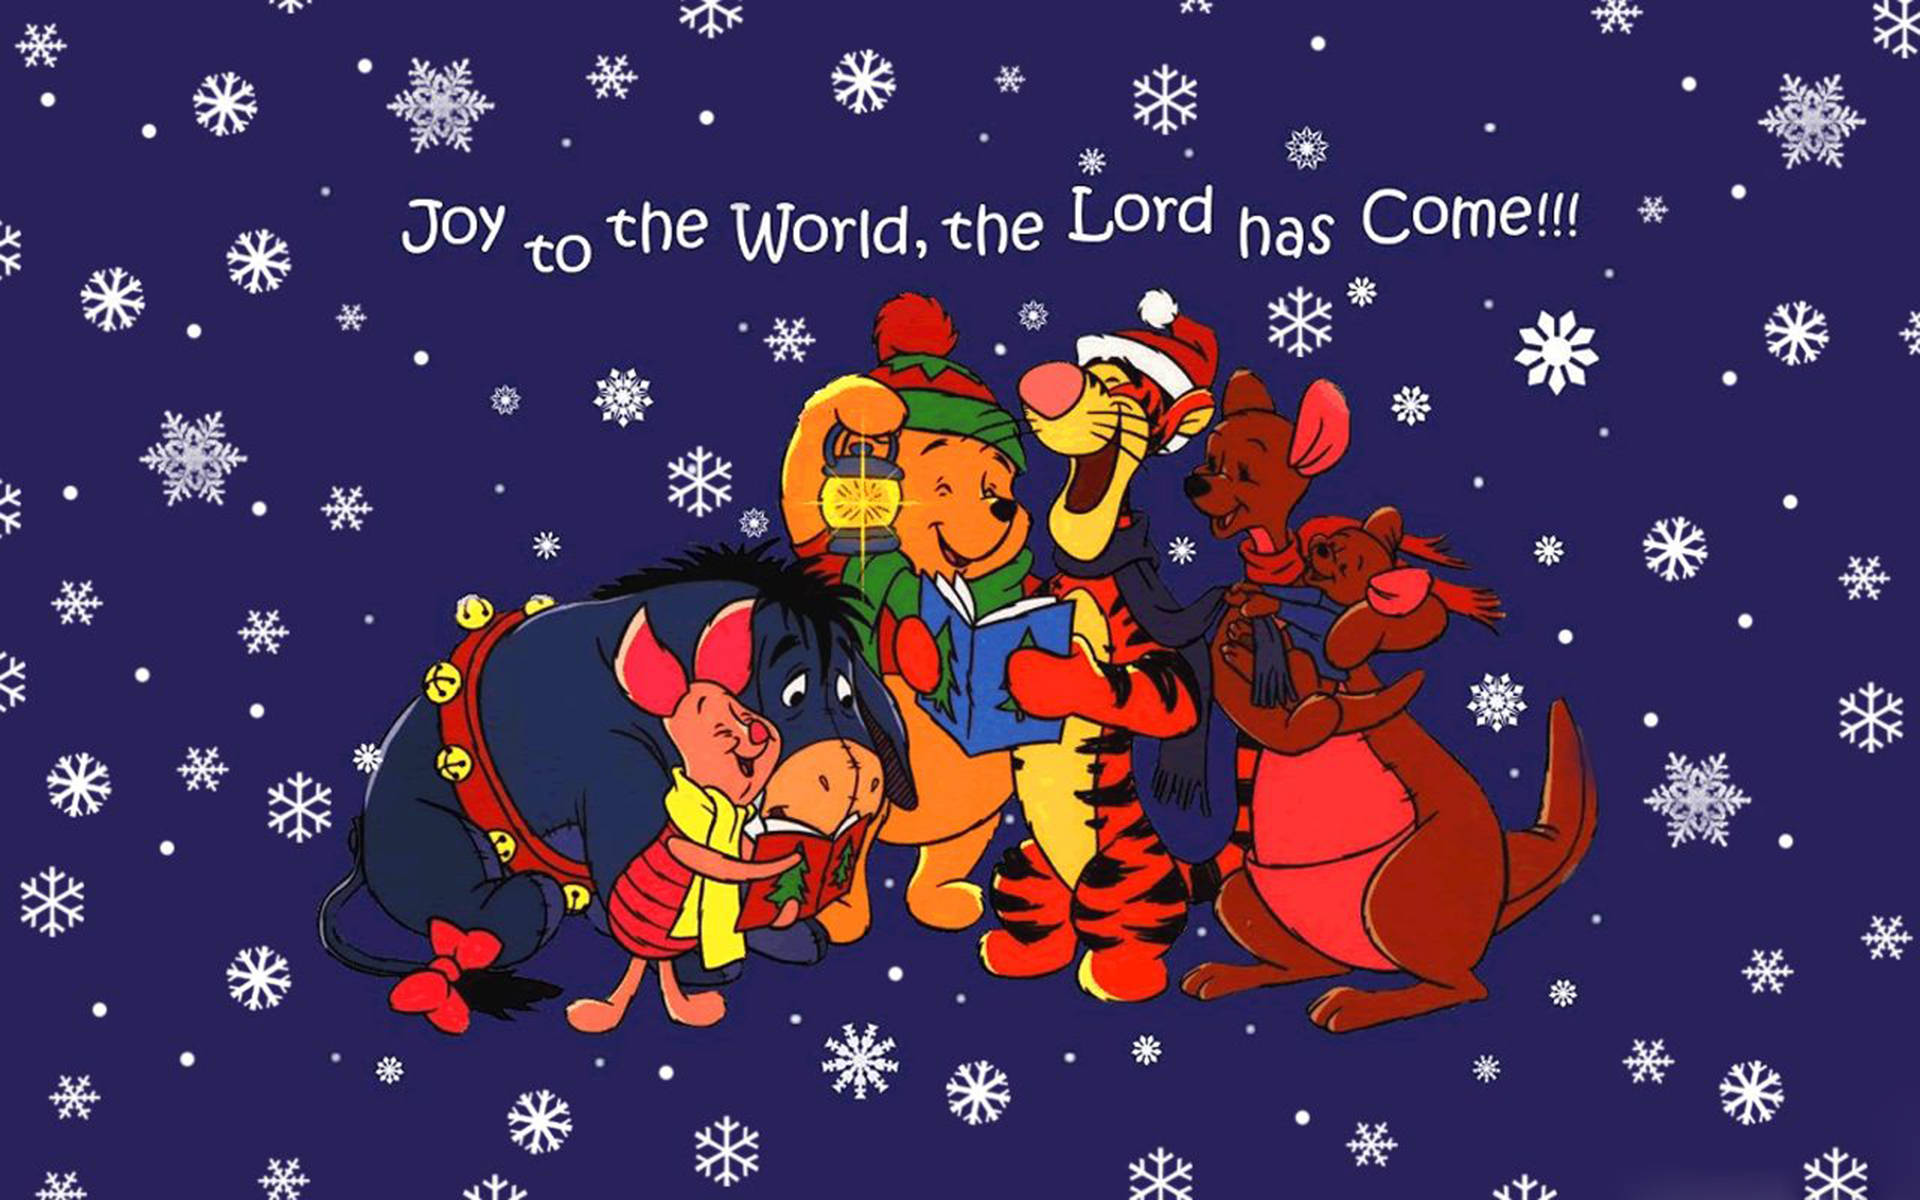 Winnie The Pooh Christmas Wallpapers  Wallpaper Cave